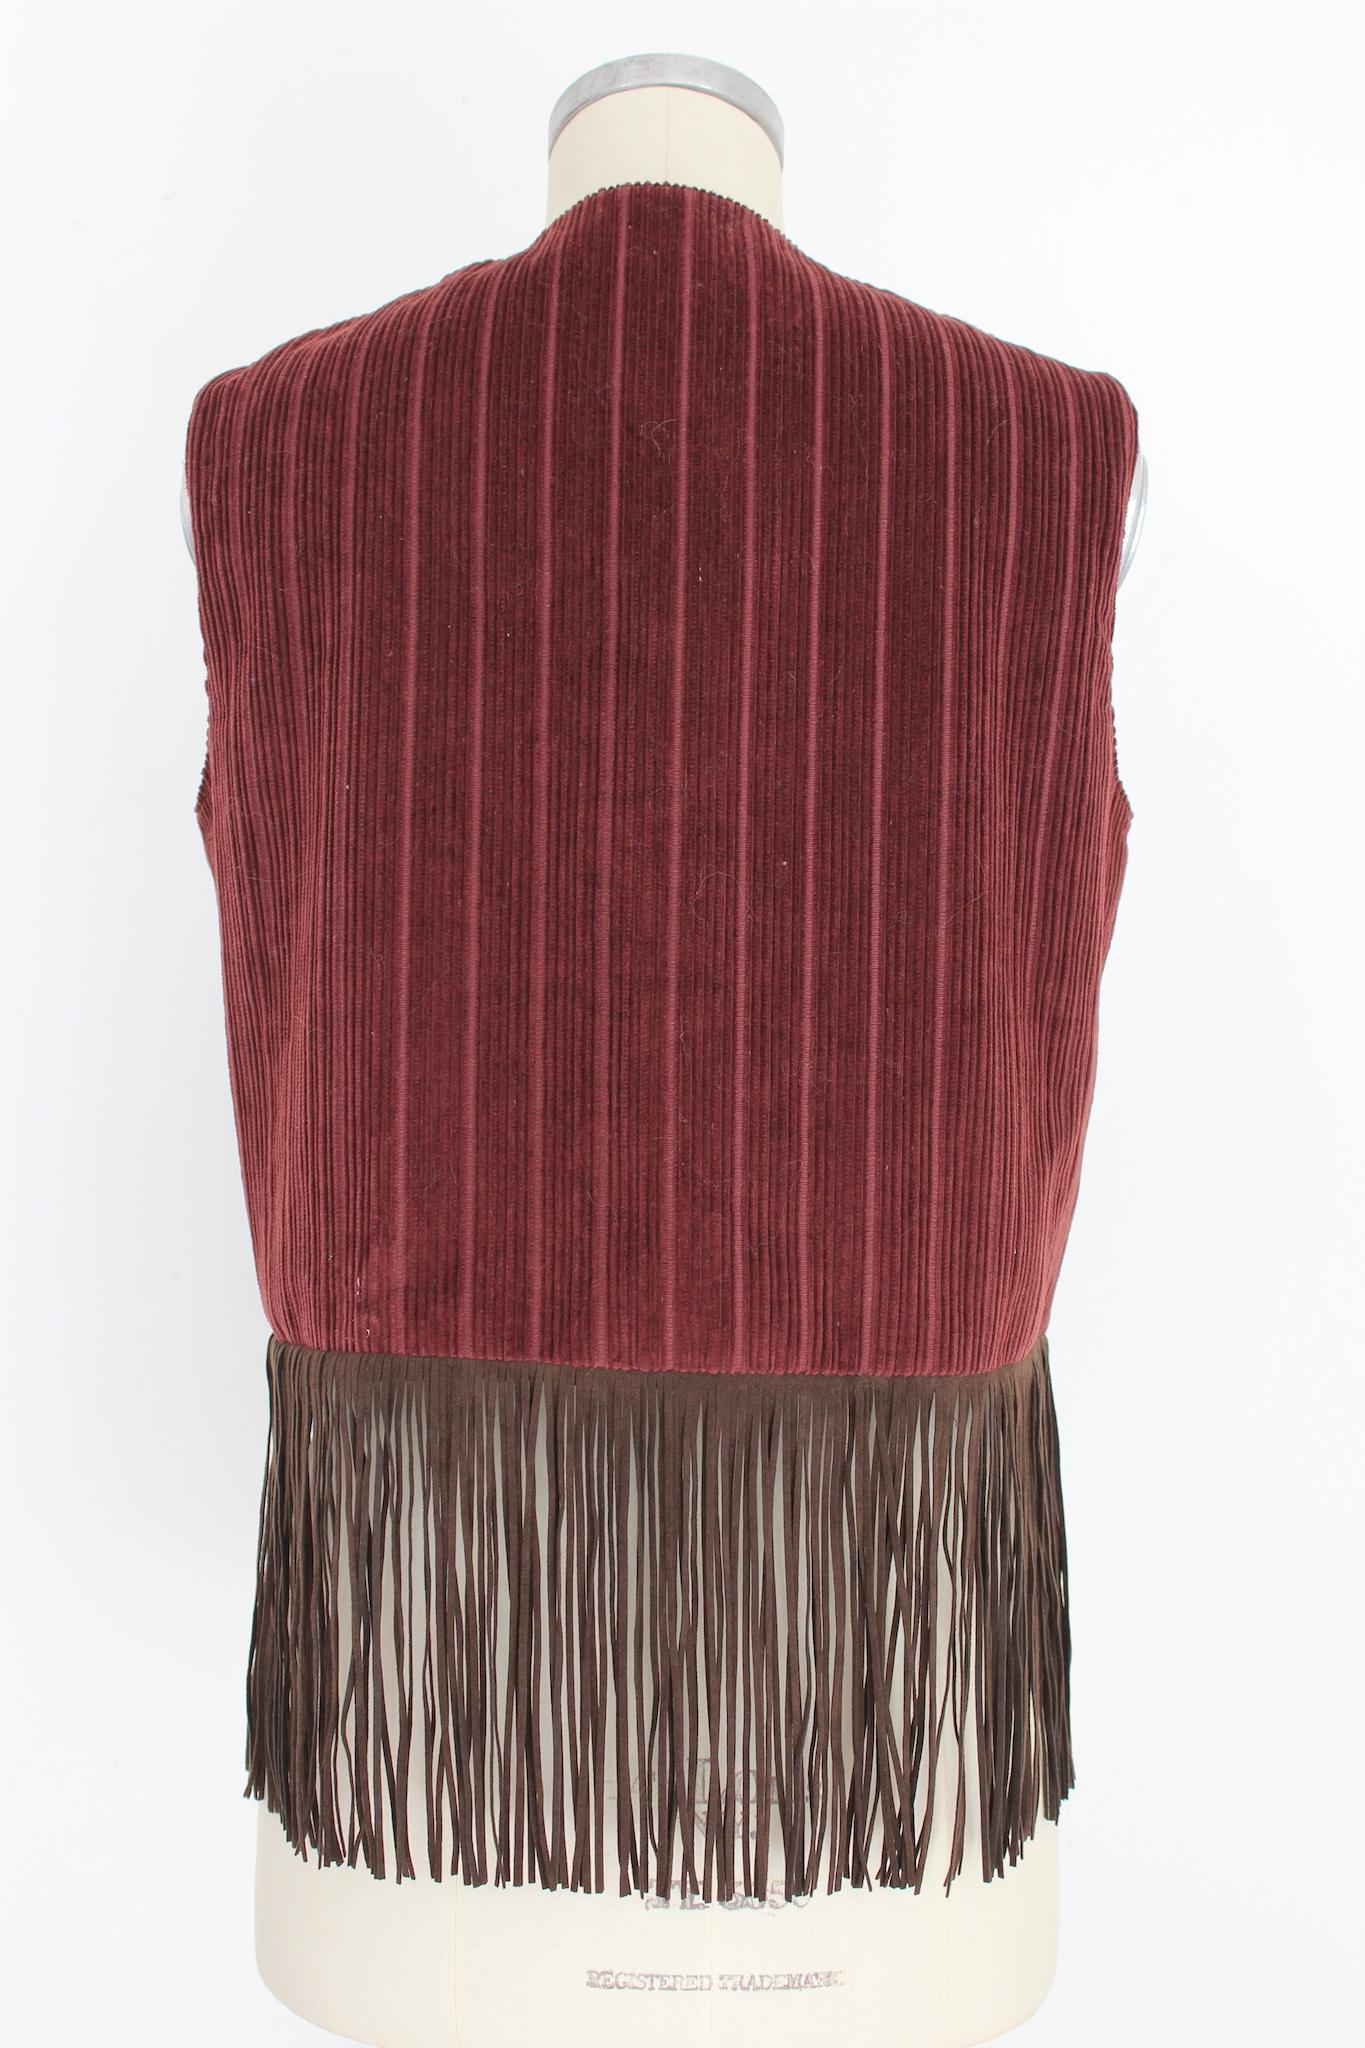 Romeo Gigli vintage 2000s velvet and fringed waistcoat. Corduroy burgundy color, brown fringes. 100% cotton fabric, internally lined. Made in Italy.

Size: S

Shoulder: 38 cm
Bust / Chest: 50 cm
Length: 67 cm
